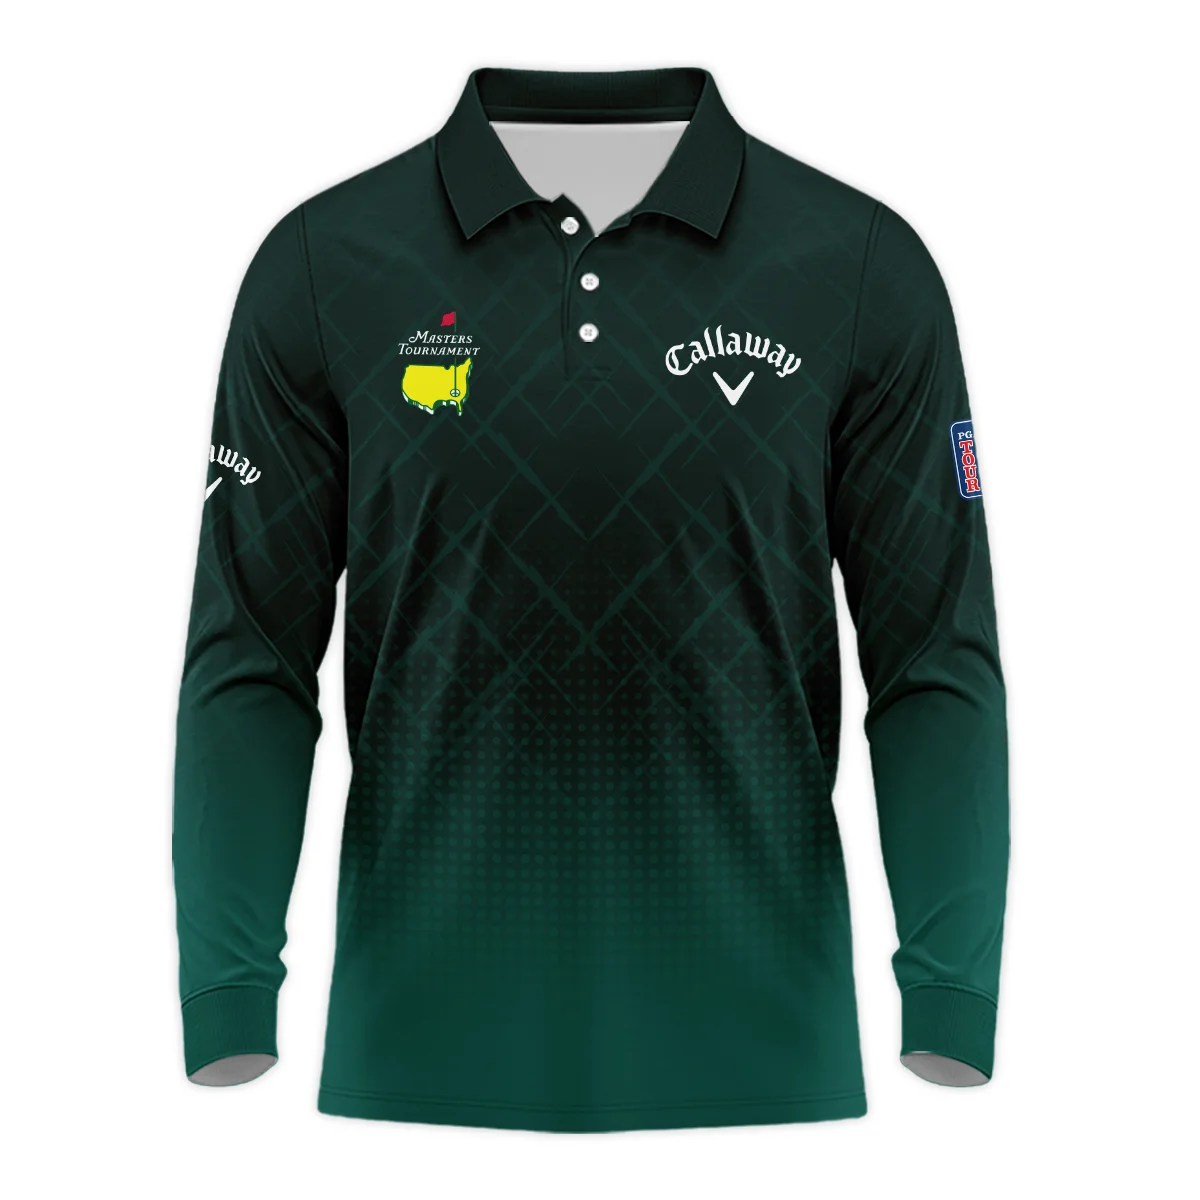 Callaway Masters Tournament Sport Jersey Pattern Dark Green Vneck Polo Shirt Style Classic Polo Shirt For Men